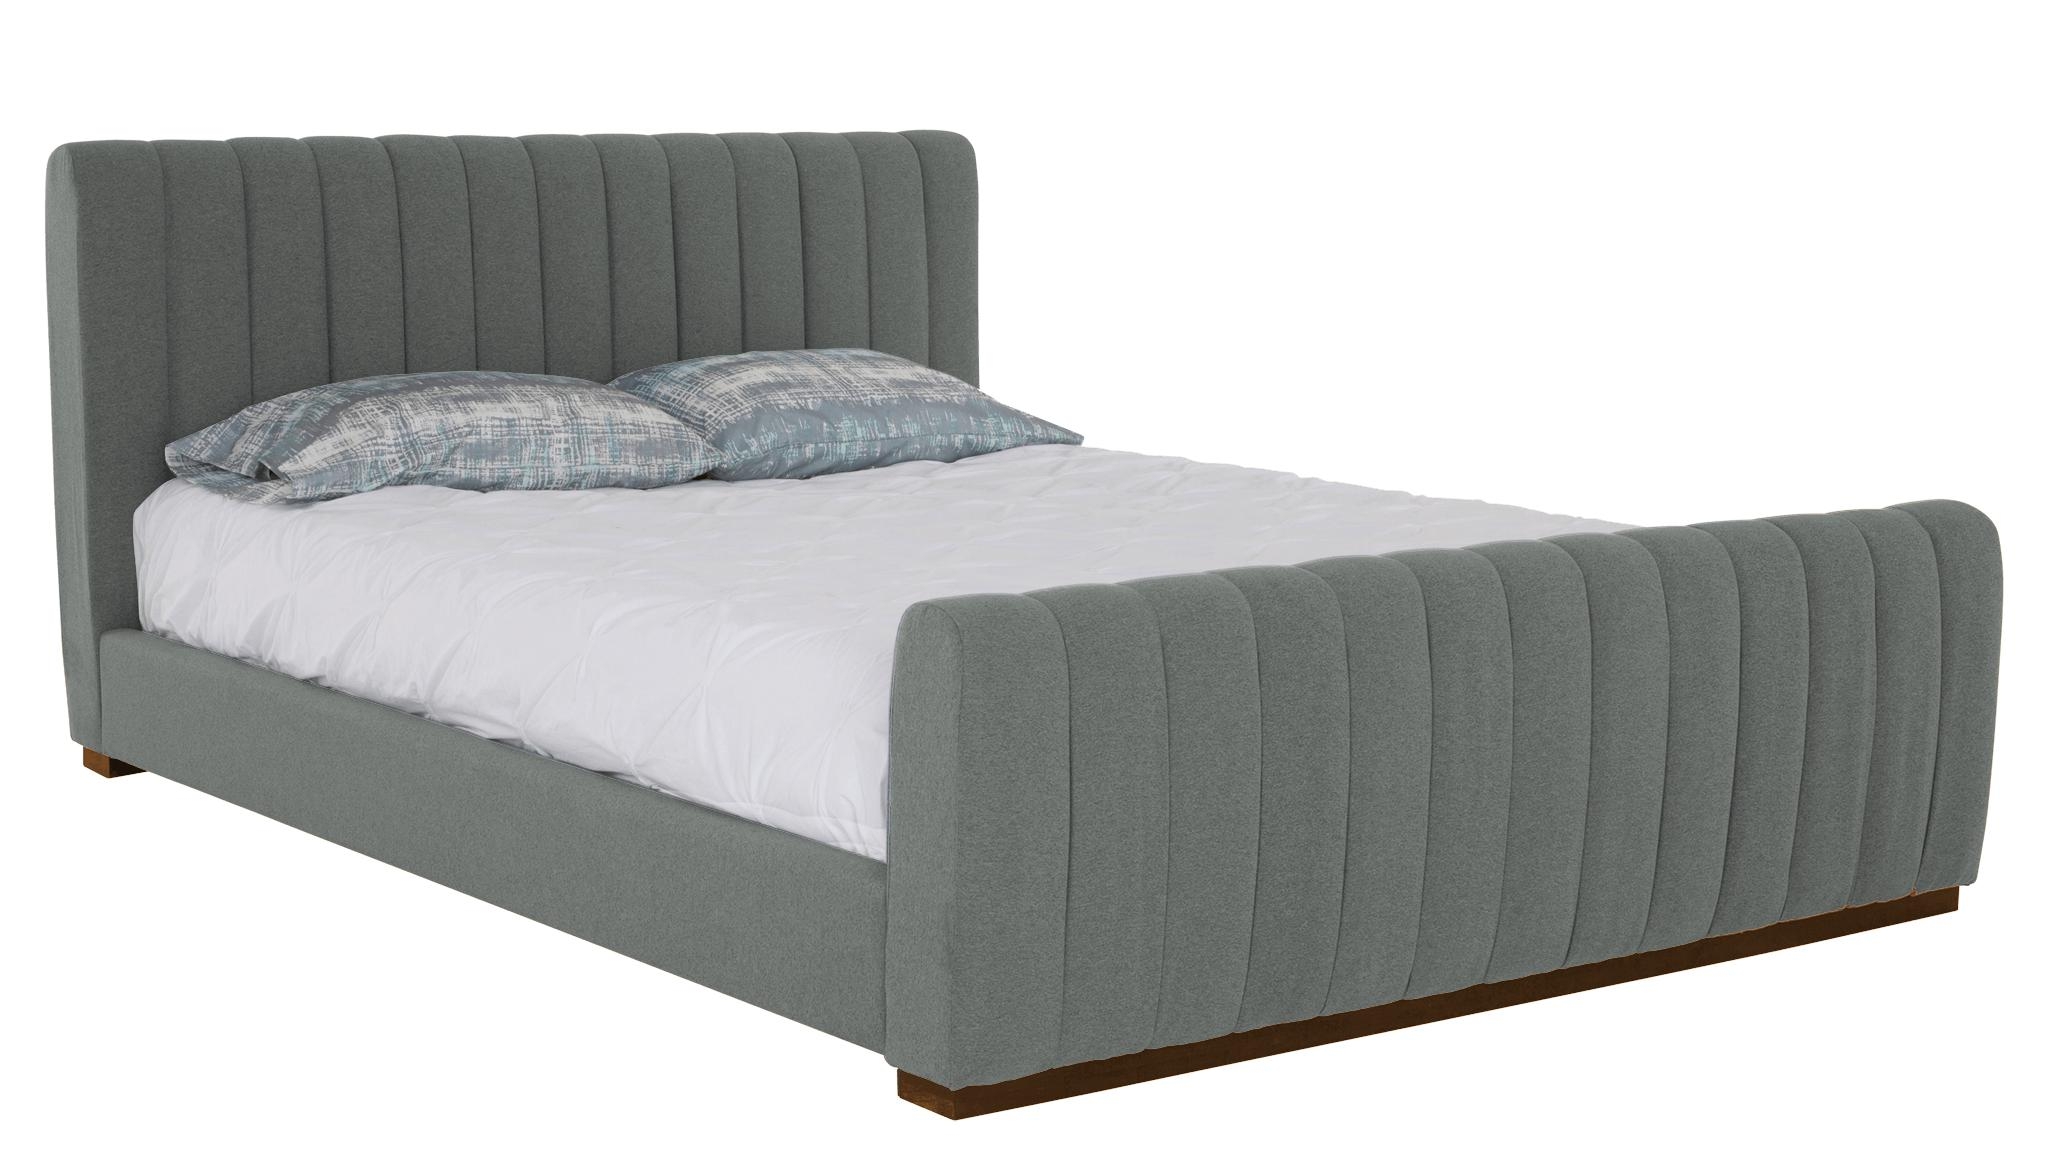 Gray Camille Mid Century Modern Bed - Essence Ash - Mocha - Eastern King - Image 1